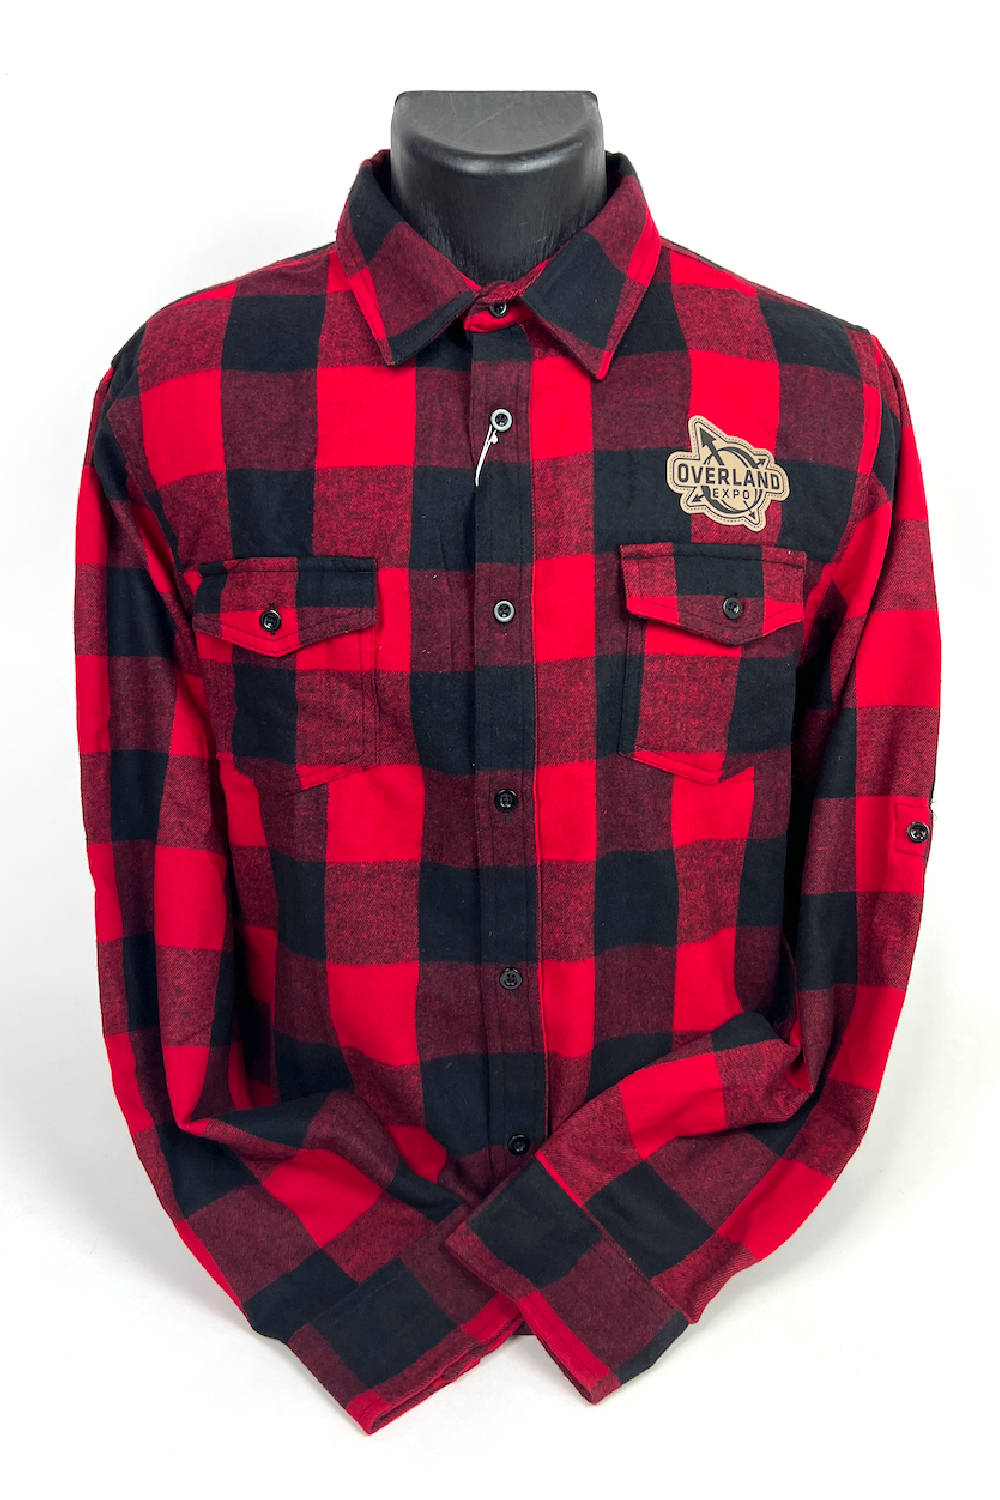 OE Compass Patch - Red & Black Buffalo Plaid Flannel